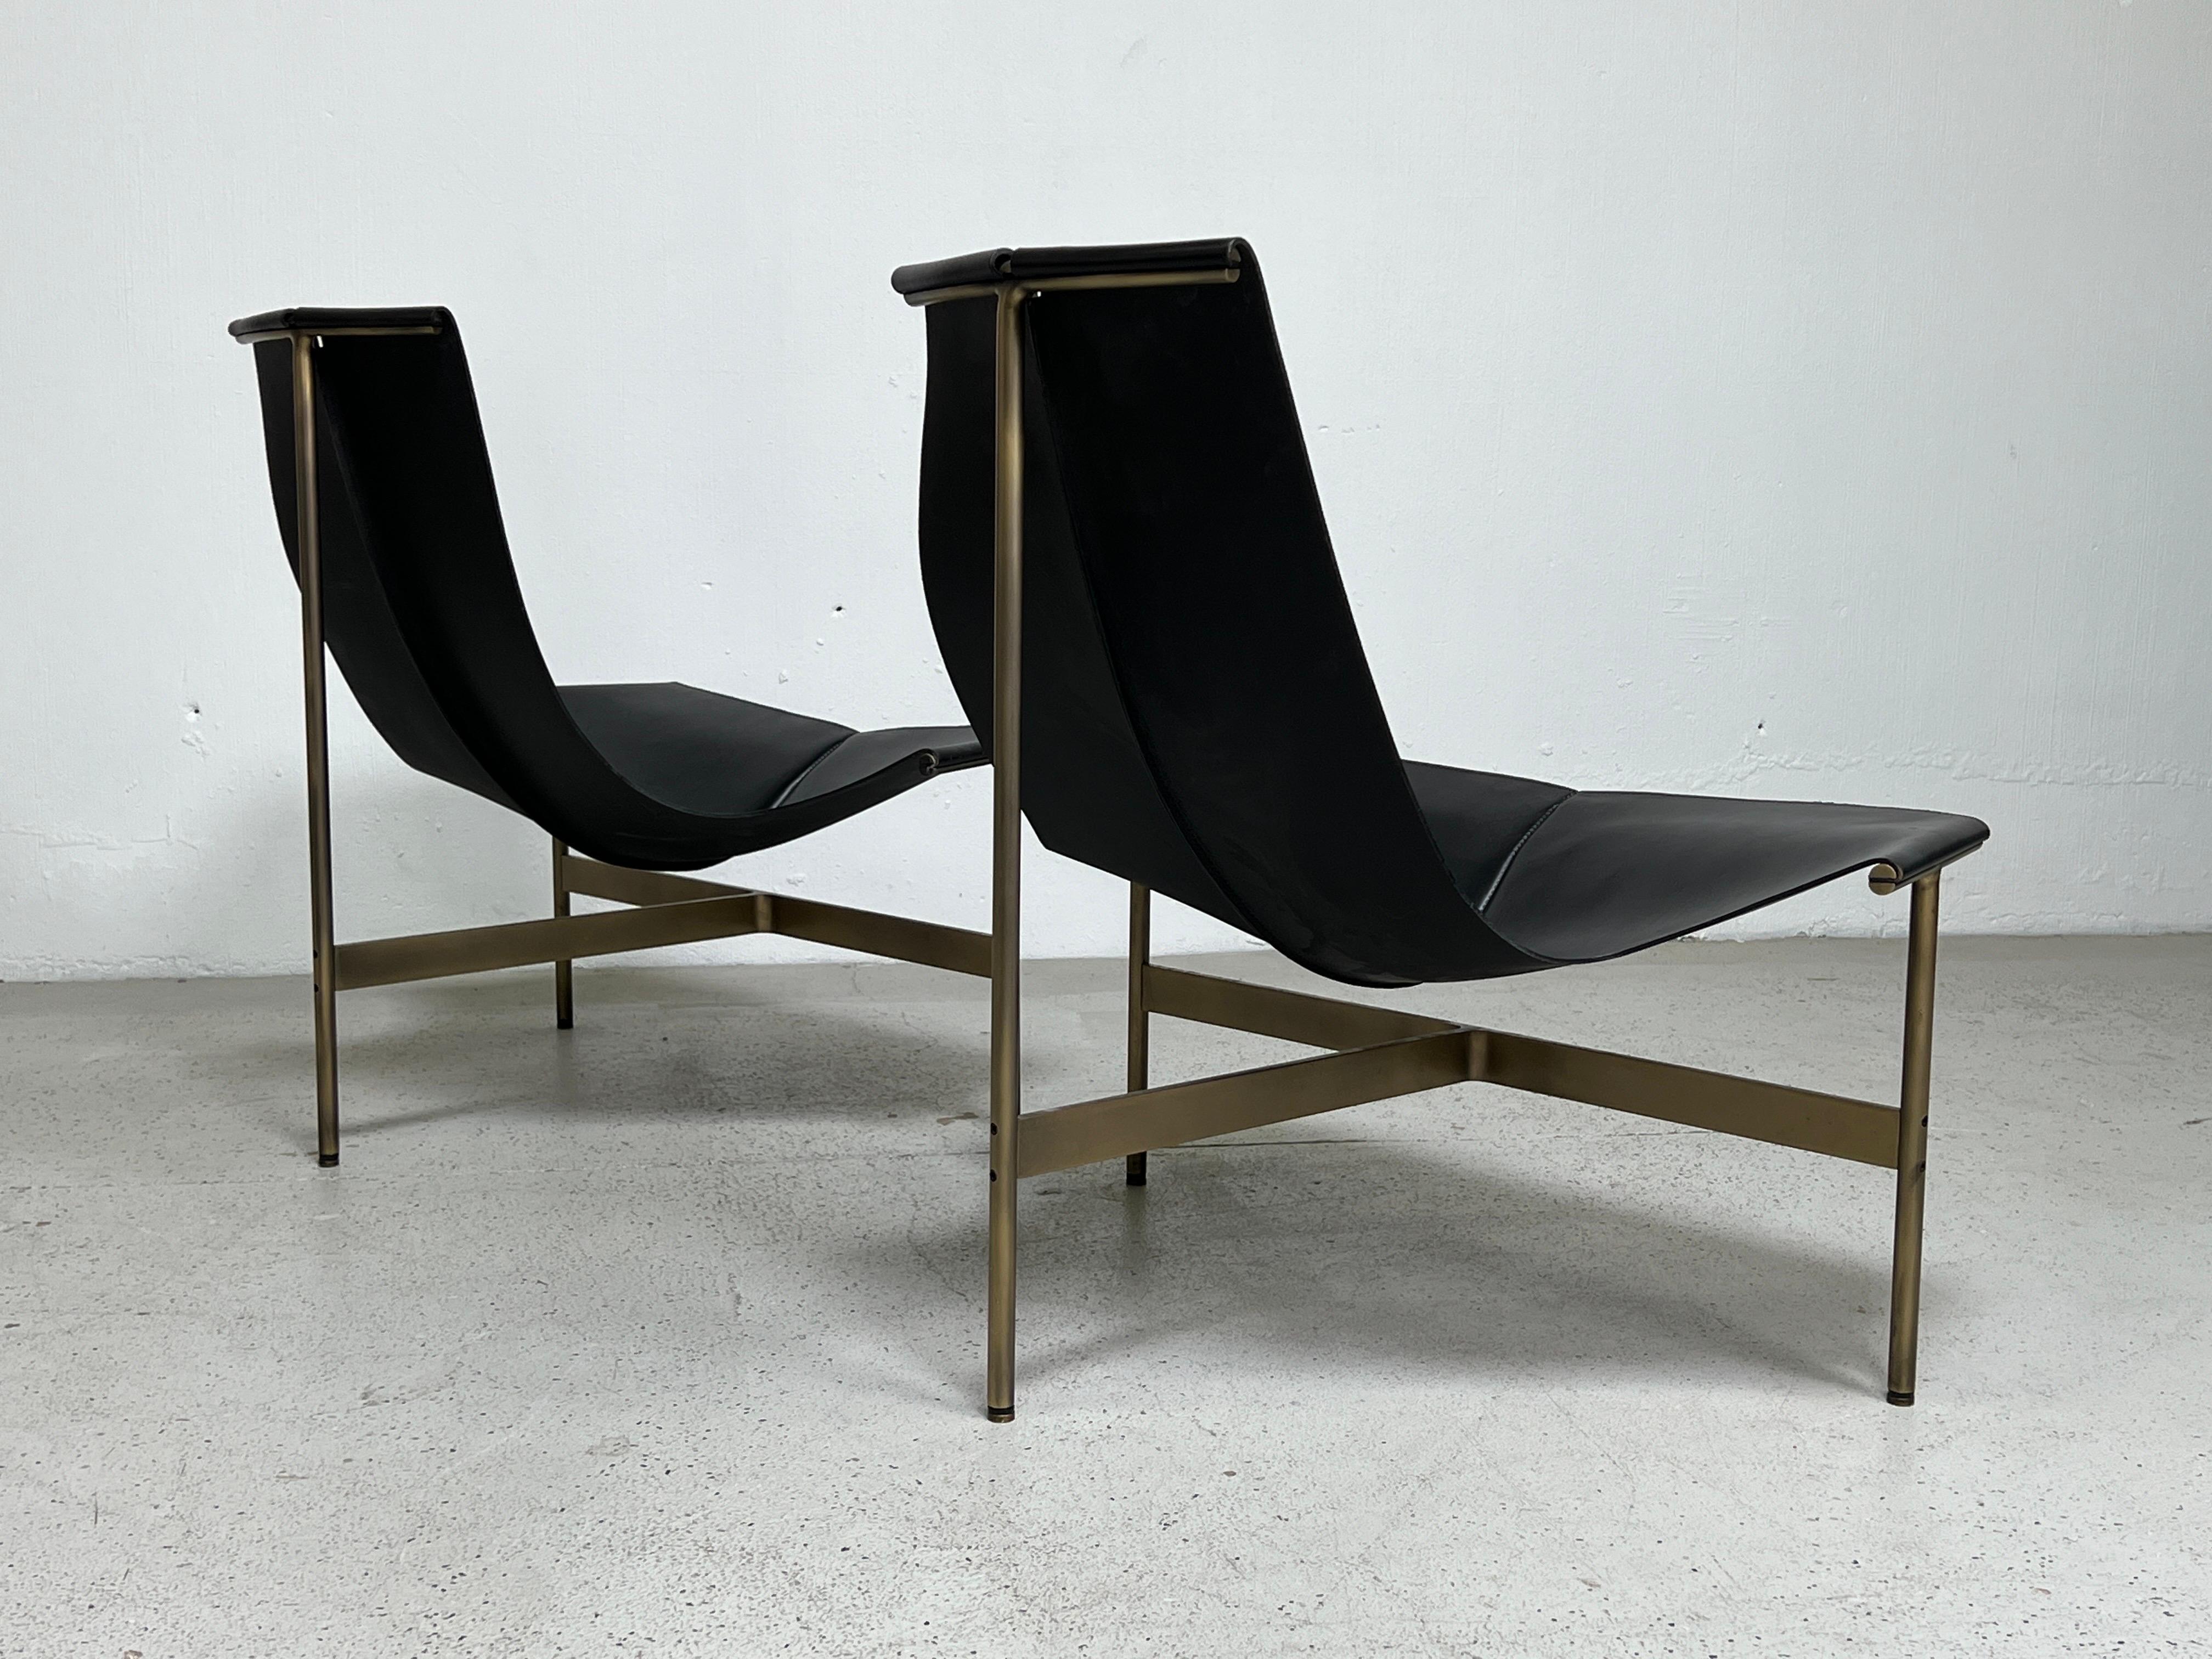 Pair of Bronze TG-15 Lounge Chair by Katavolos, Littell, & Kelley For Sale 9